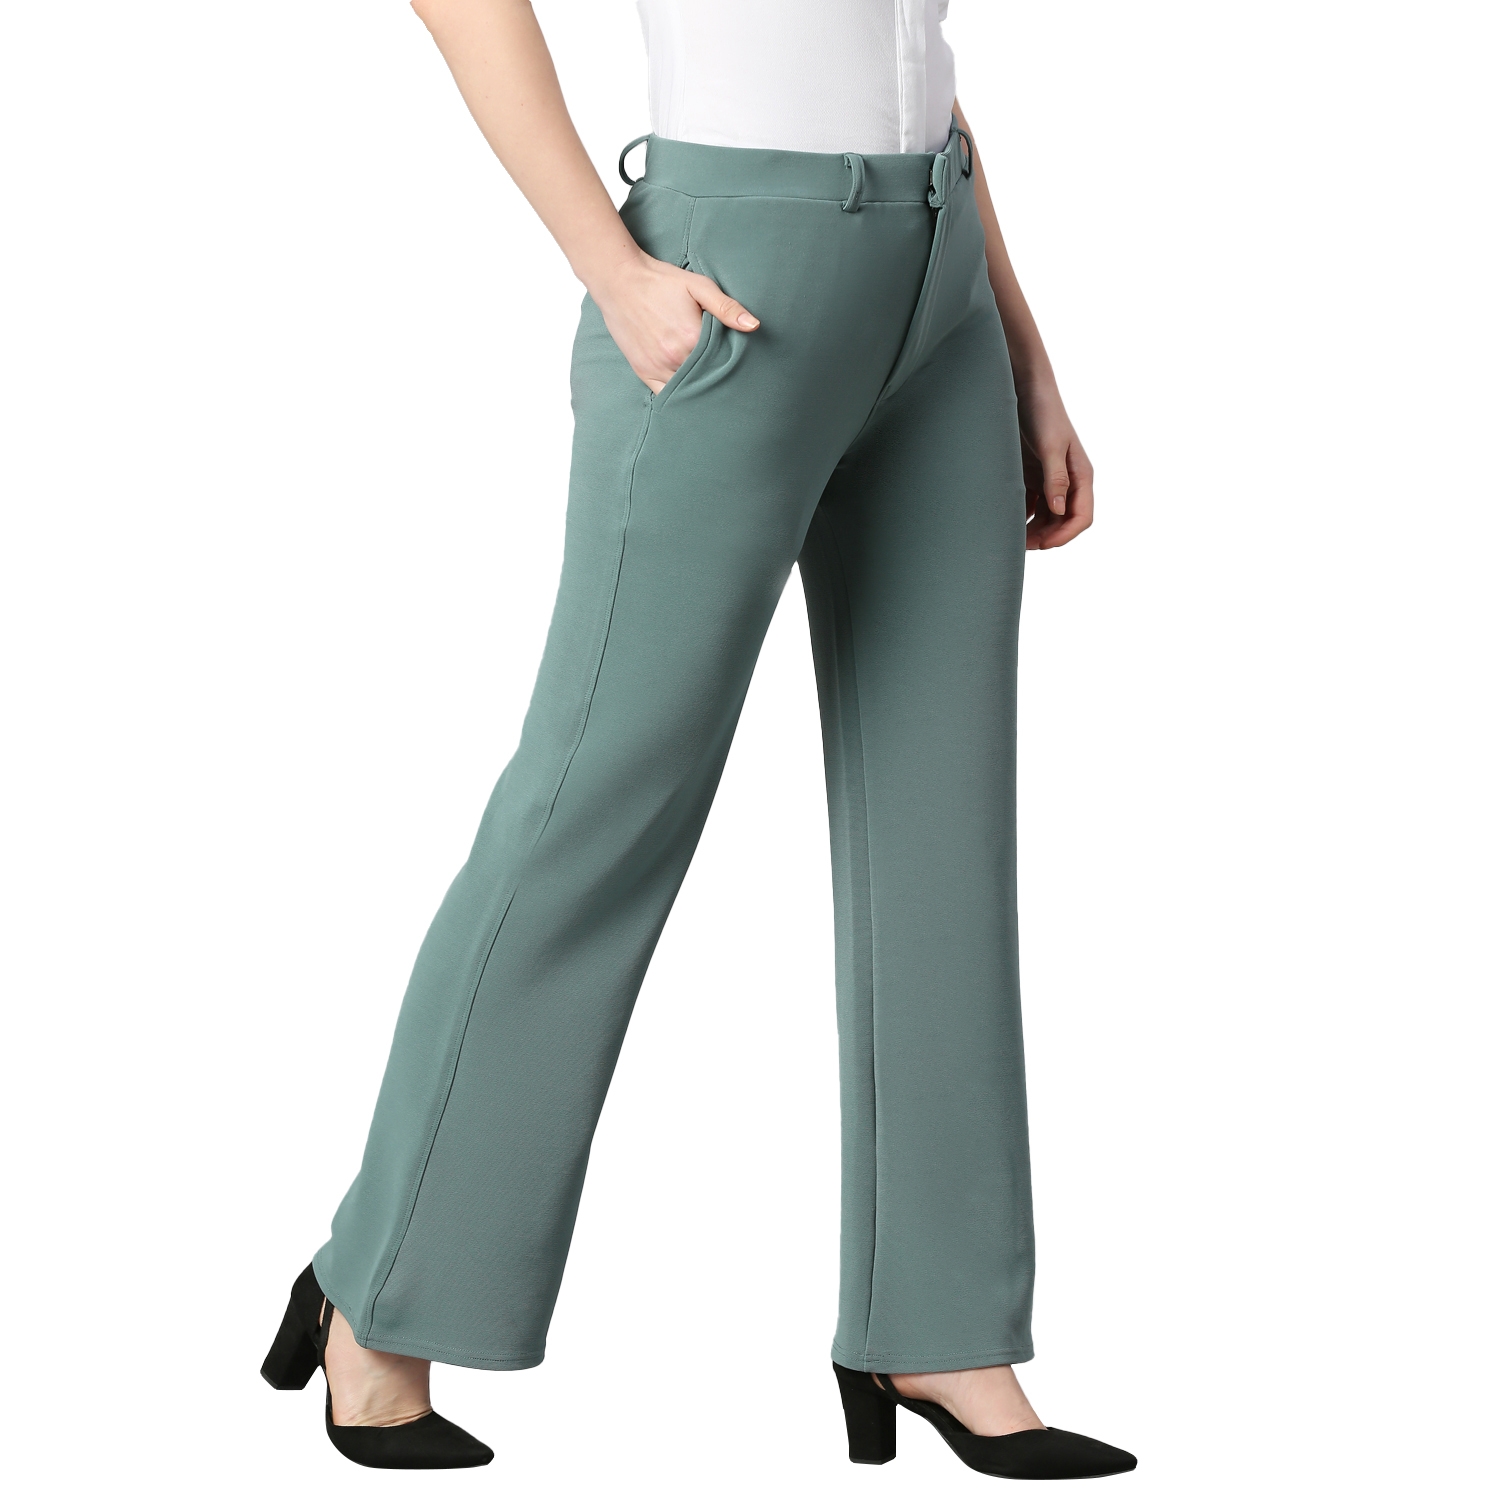 Denim Bell Bottom Pants for Women Solid Color High Waist Flare Leg Trousers  with Pockets Slim-Fit Raw Hem Ankle Jeans - Walmart.com